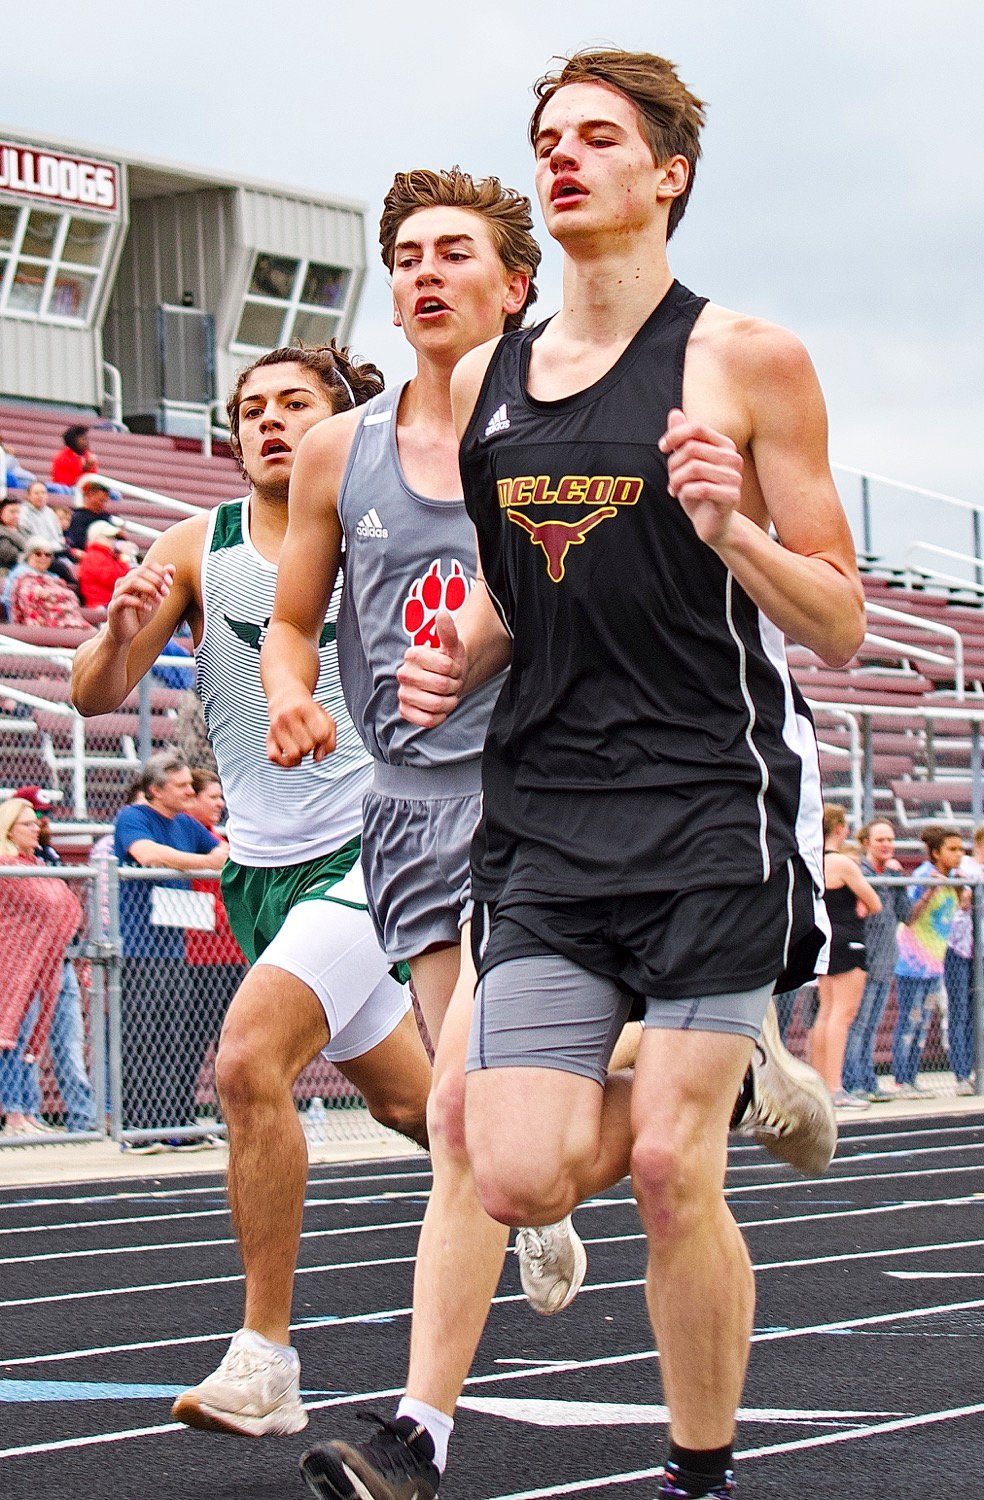 Micah Smith (middle) ran a tough race in the 1600 meters. He came into the final stretch in second place, but three runners eclipsed his kick, just shy of his ticket to the regional meet. [more shutter speed]